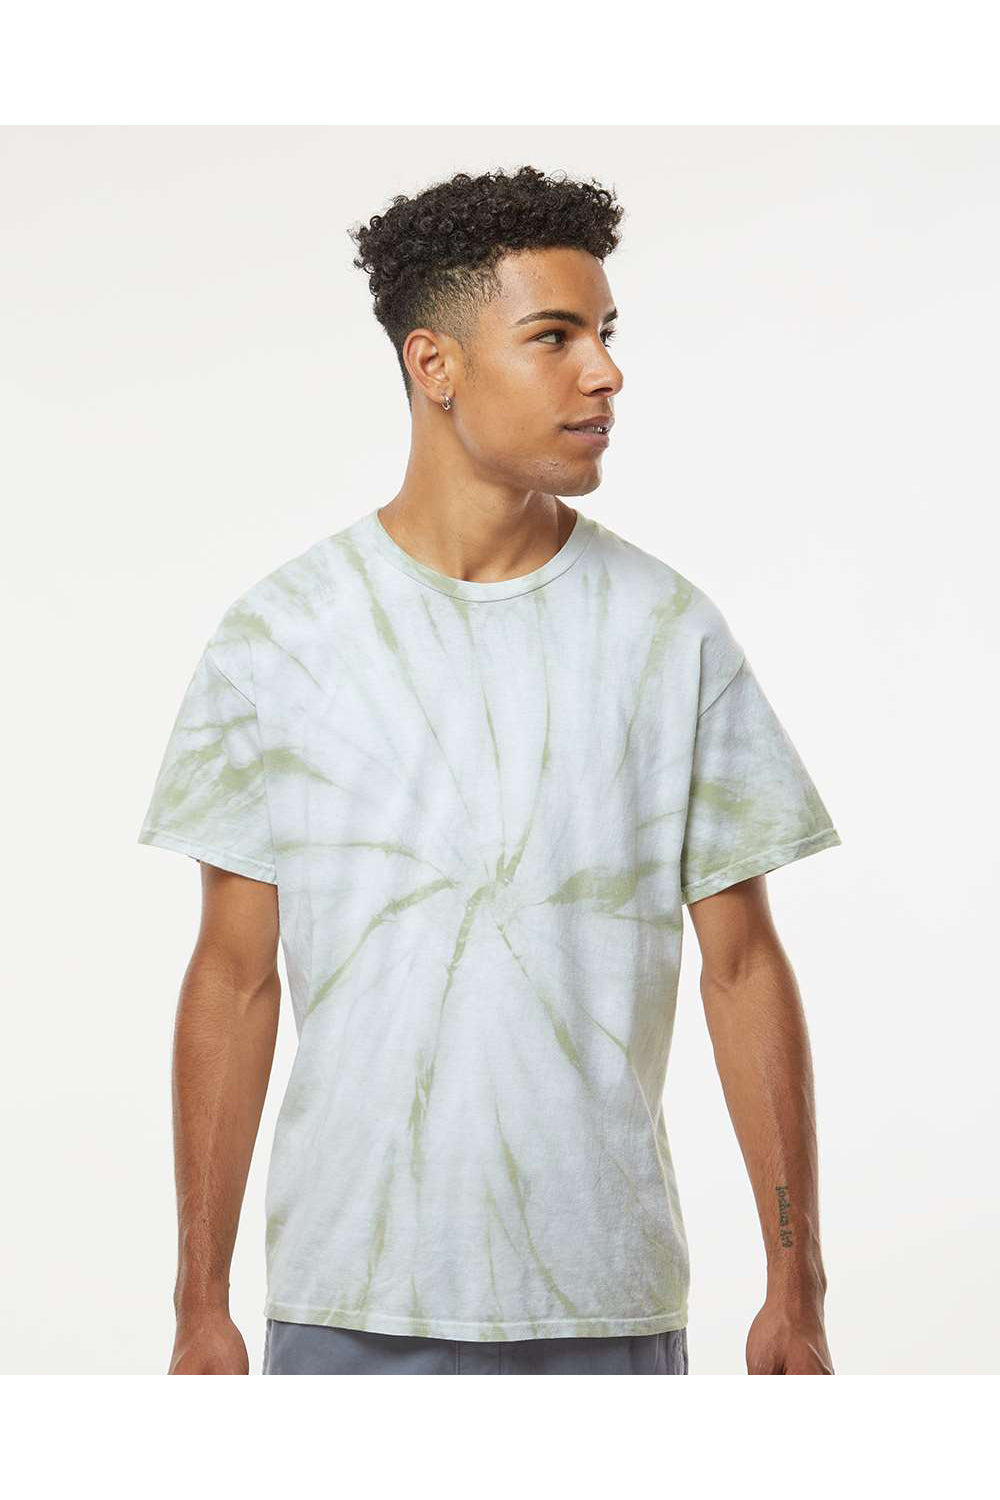 Dyenomite 200CY Mens Cyclone Pinwheel Tie Dyed Short Sleeve Crewneck T-Shirt Olive Oil Model Front